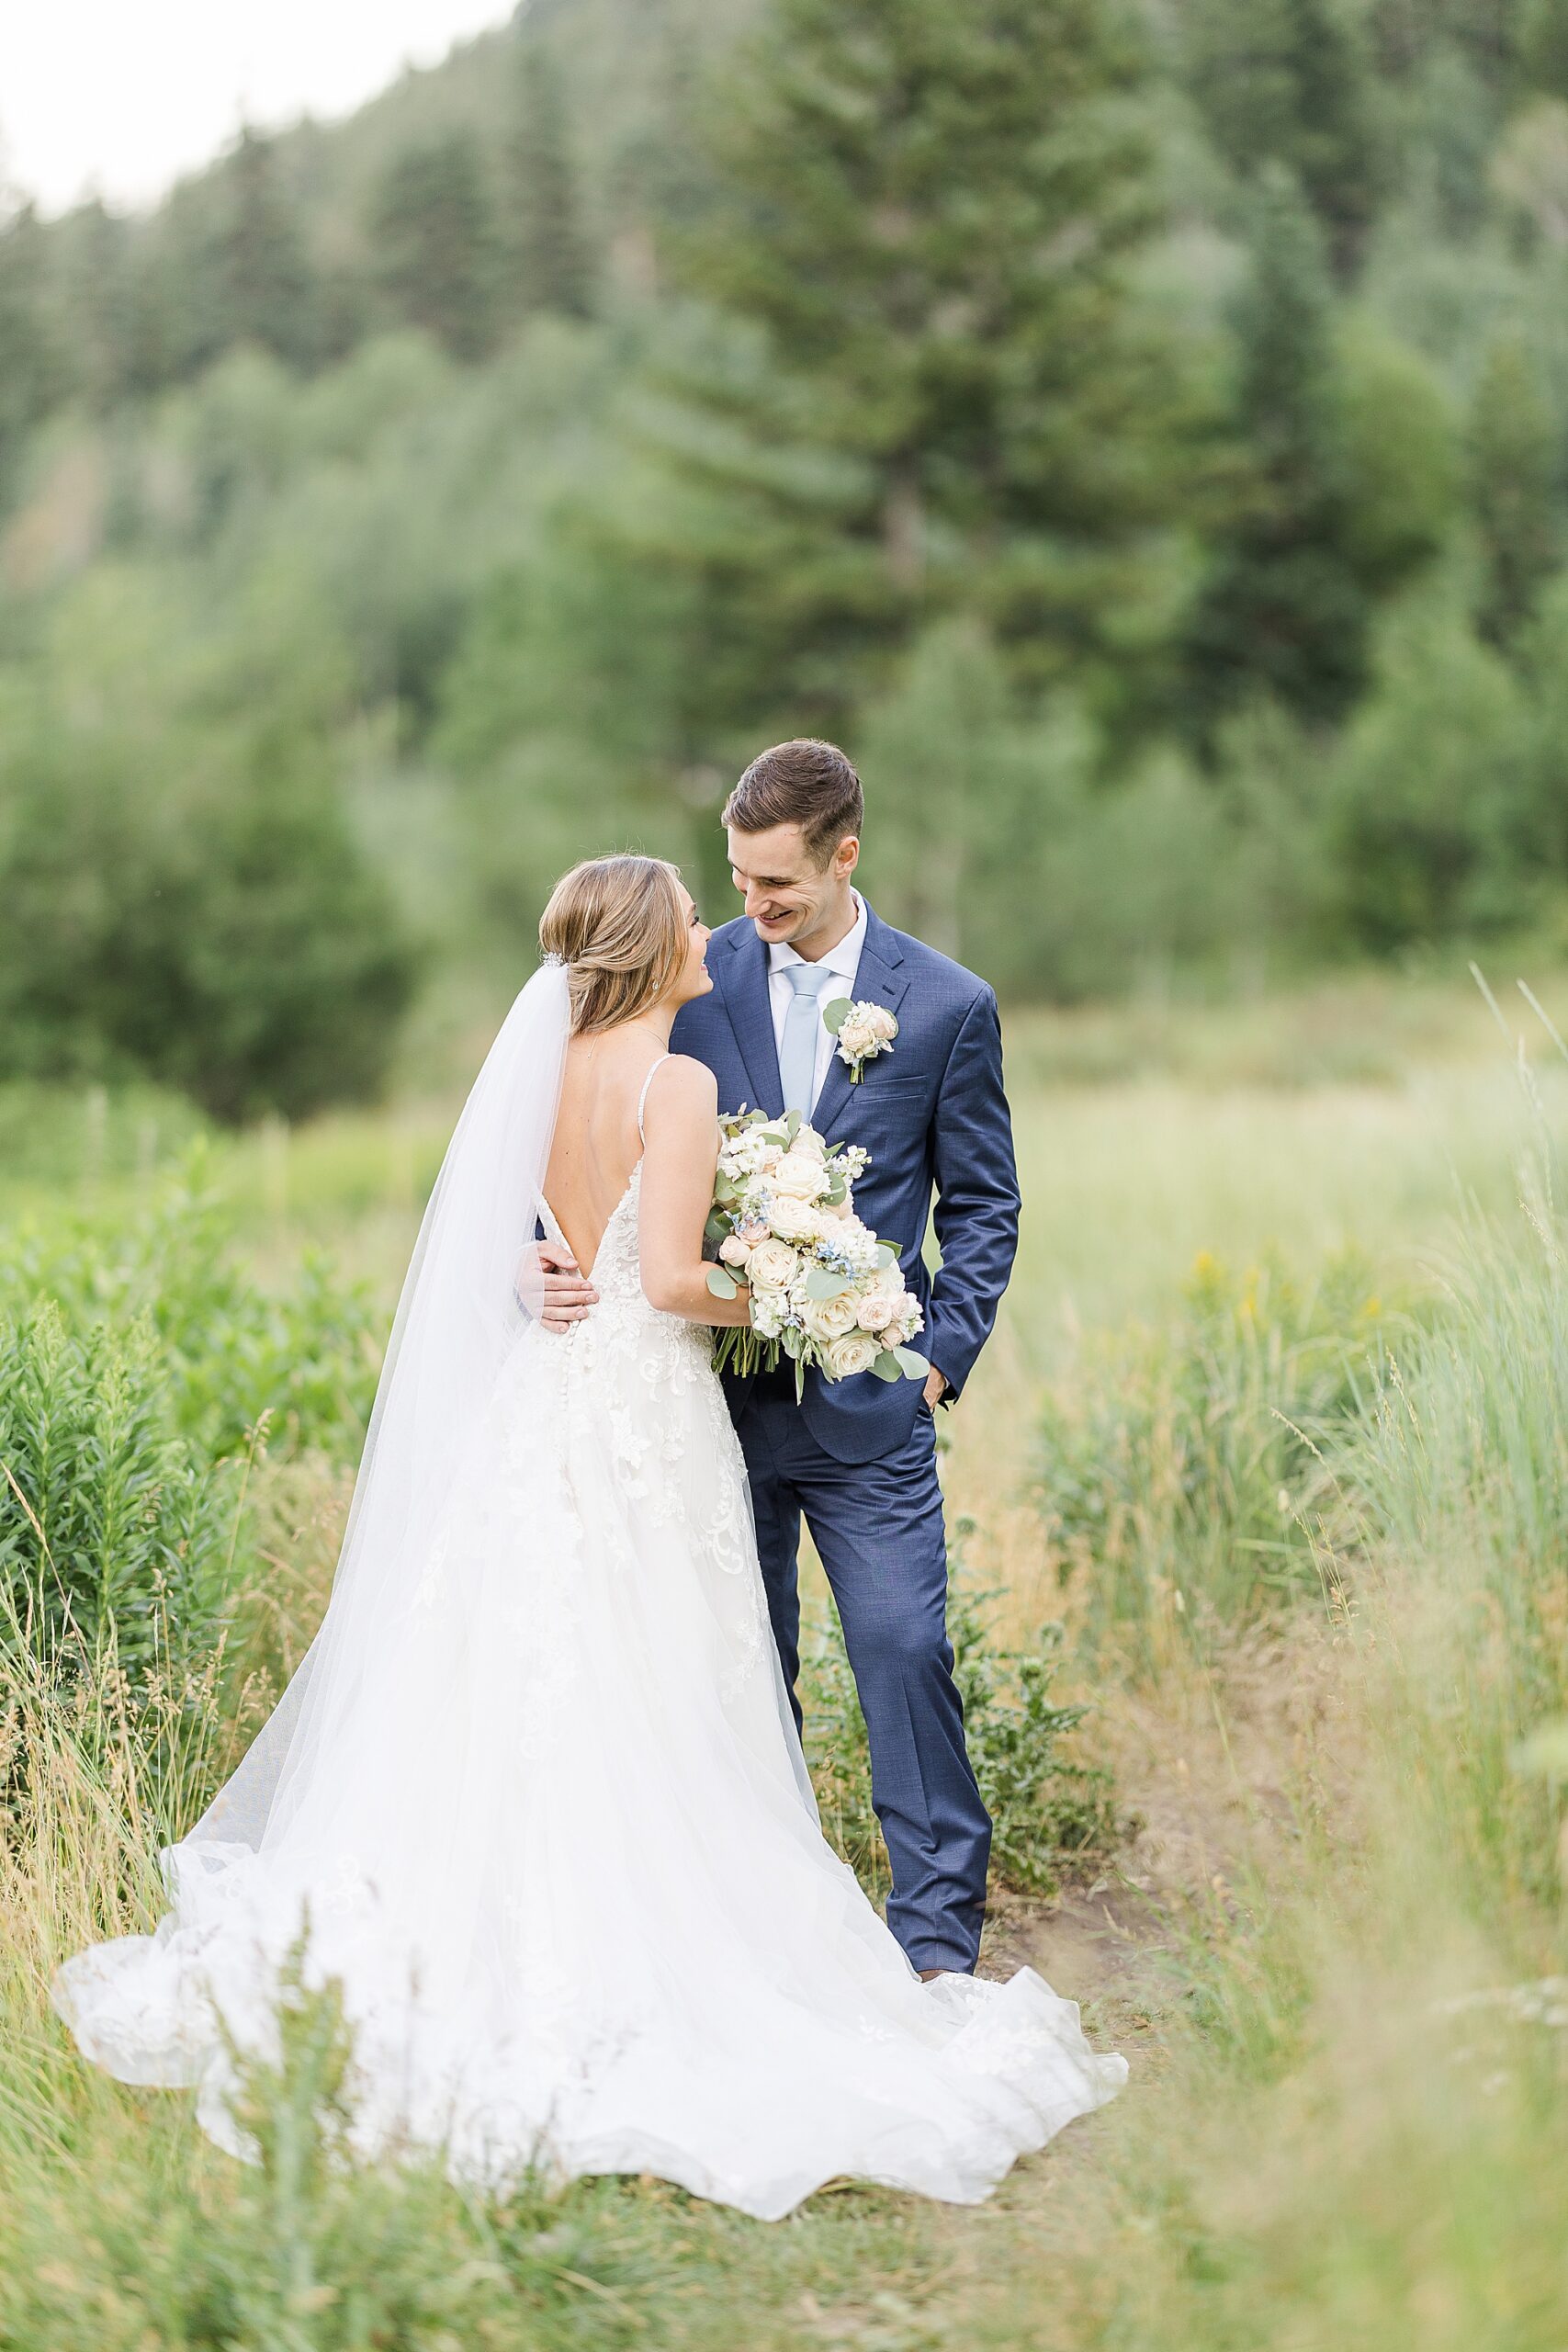 Intimate wedding photography in Provo